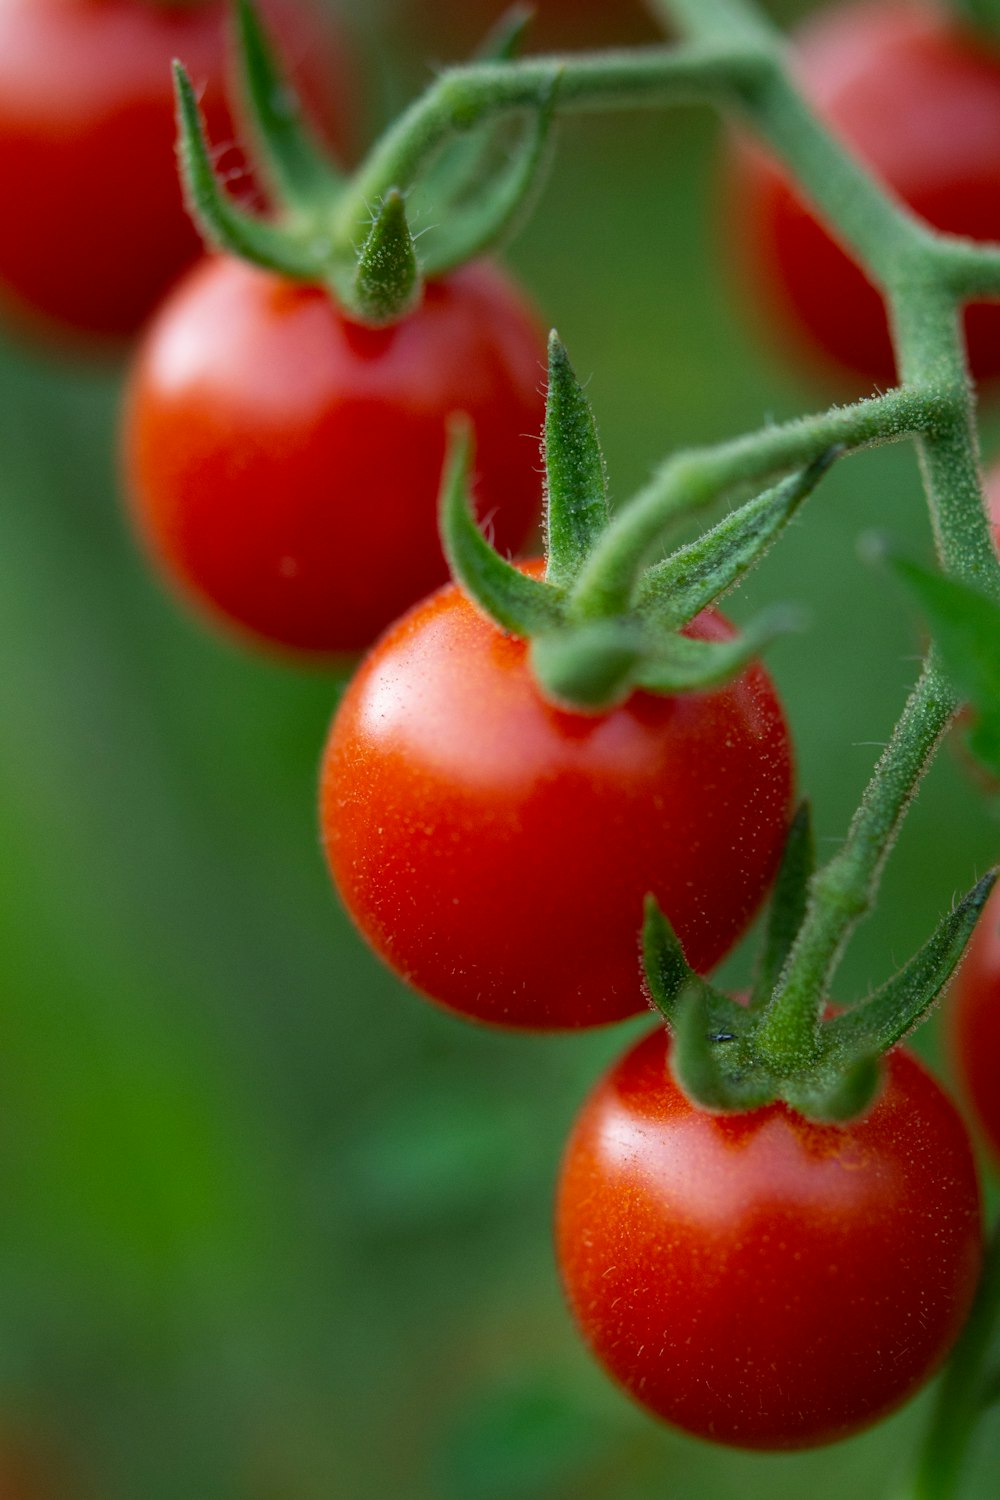 a close up of some tomatoes